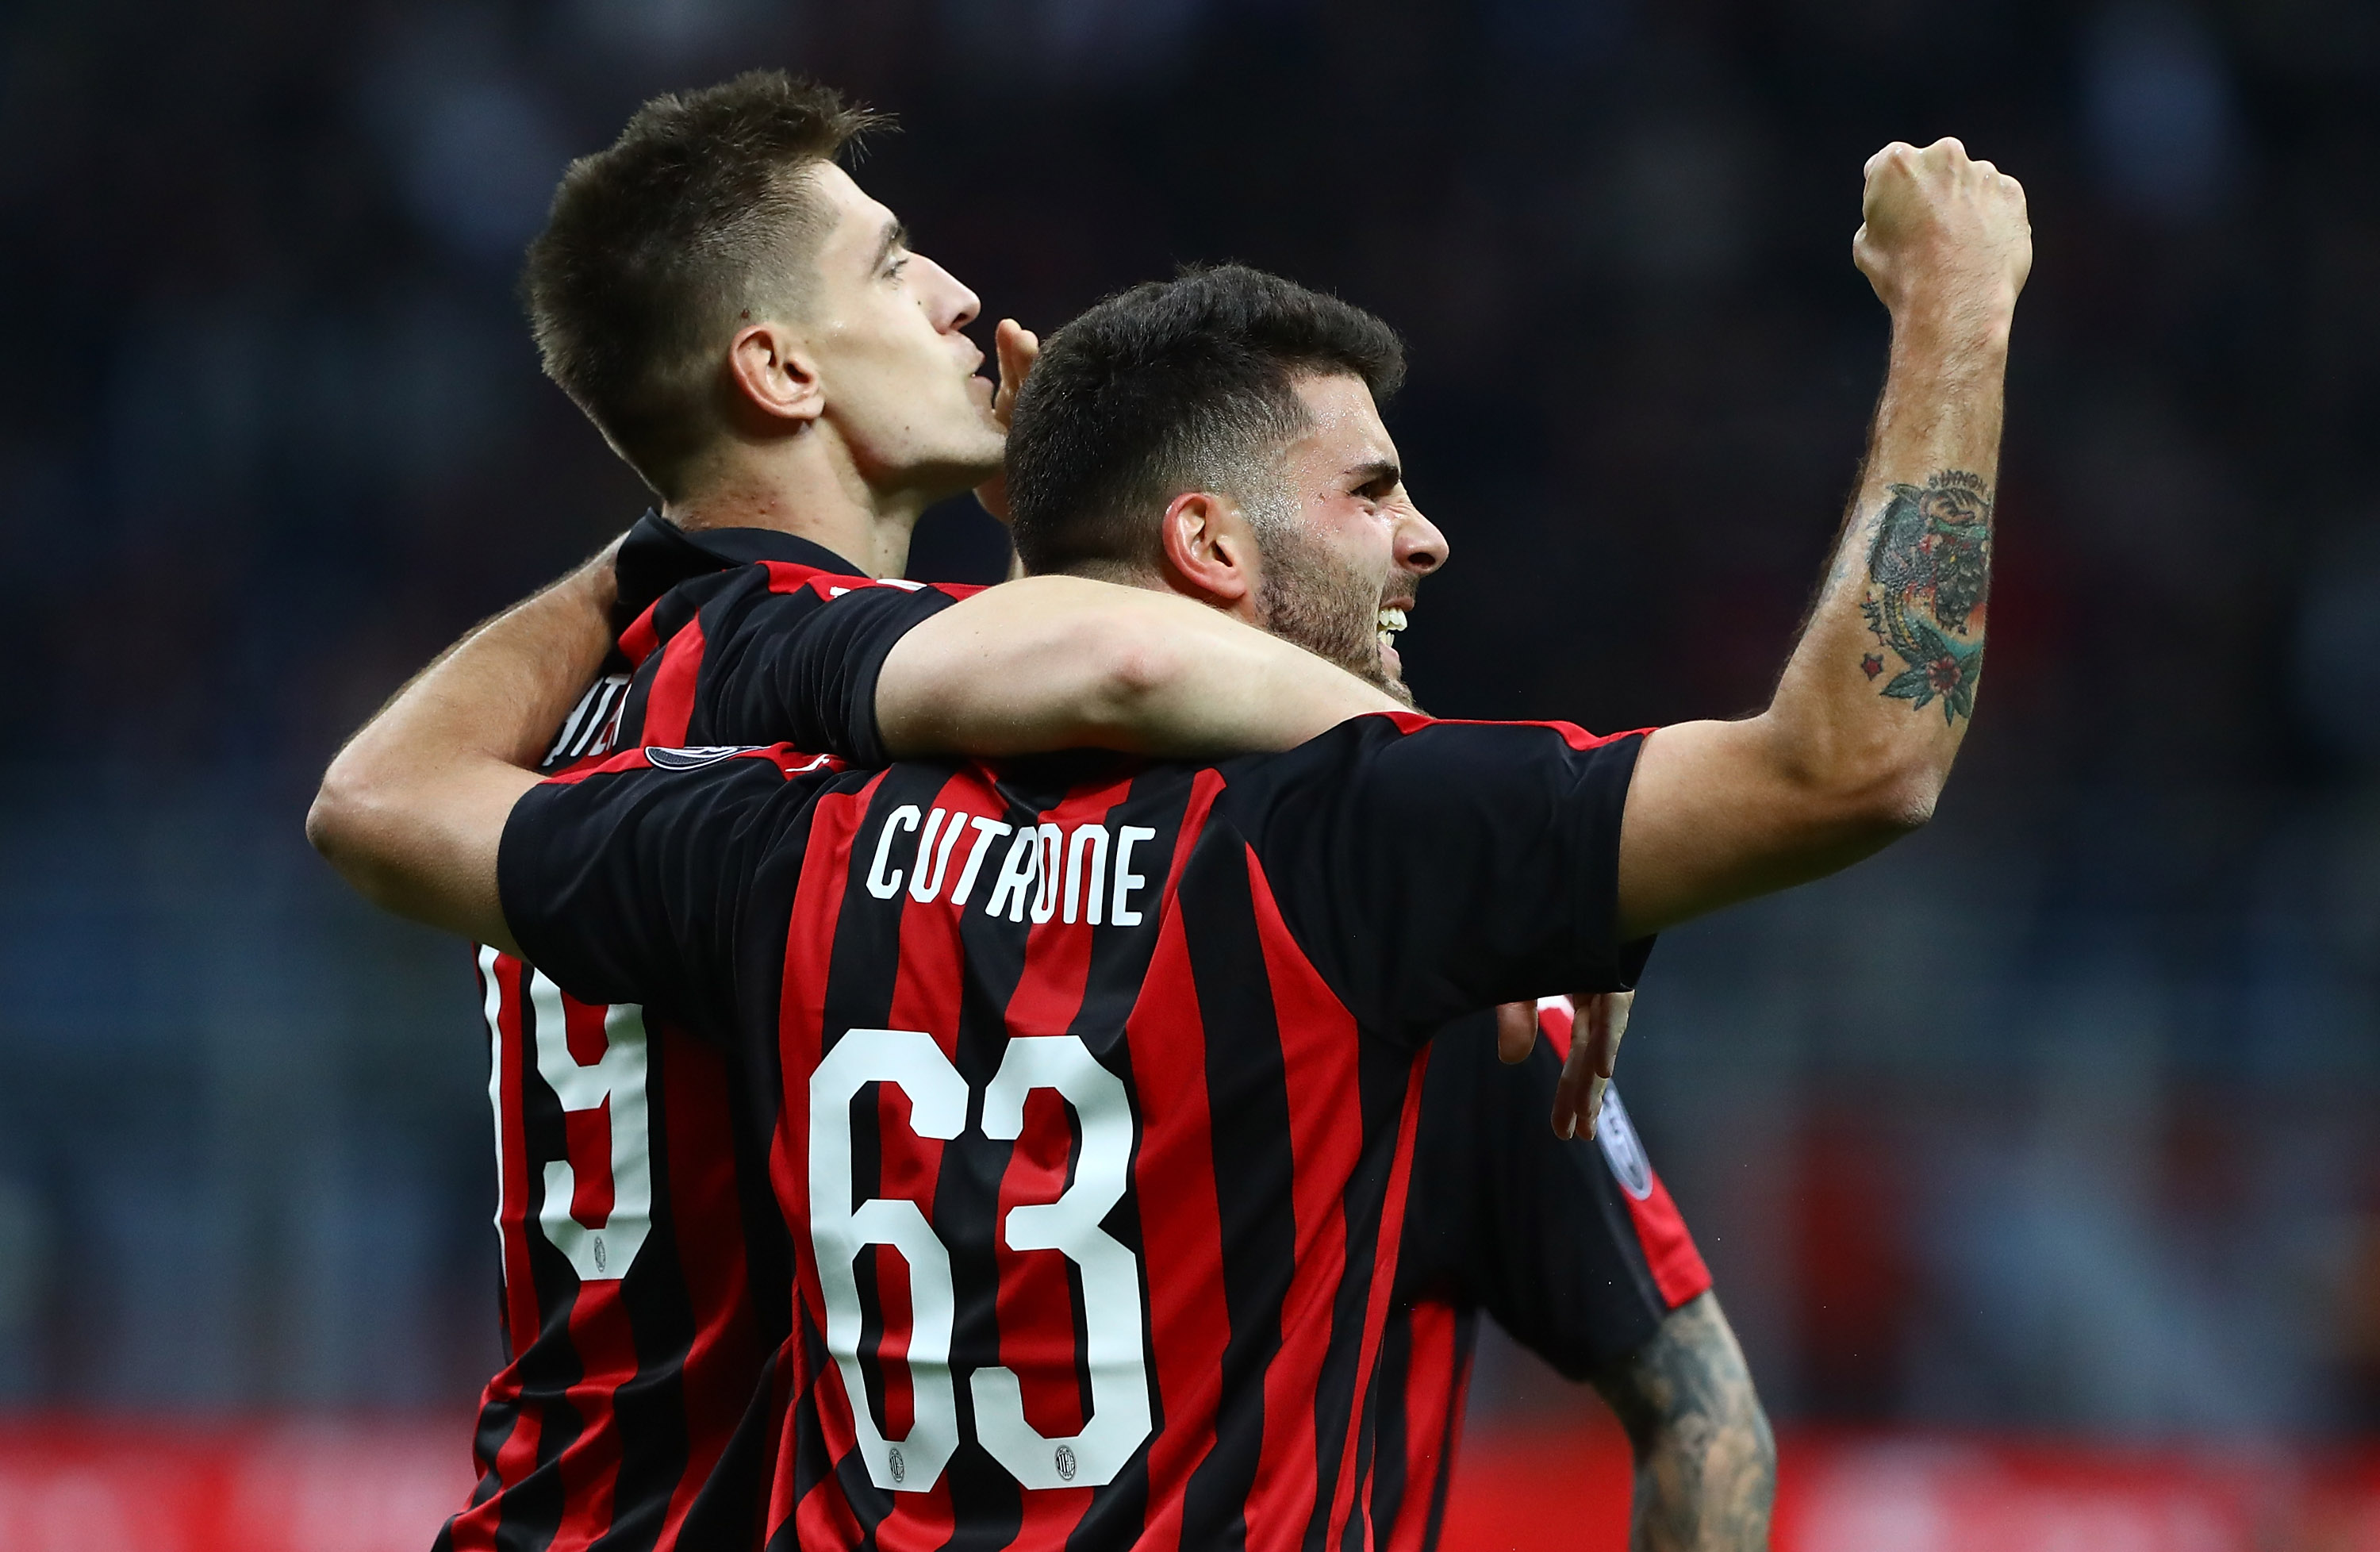 MILAN, ITALY - APRIL 02:  Krzysztof Piatek (L) of AC Milan celebrates with his team-mate Patrick Cutrone (R) after scoring the opening goal during the Serie A match between AC Milan and Udinese at Stadio Giuseppe Meazza on April 2, 2019 in Milan, Italy.  (Photo by Marco Luzzani/Getty Images)